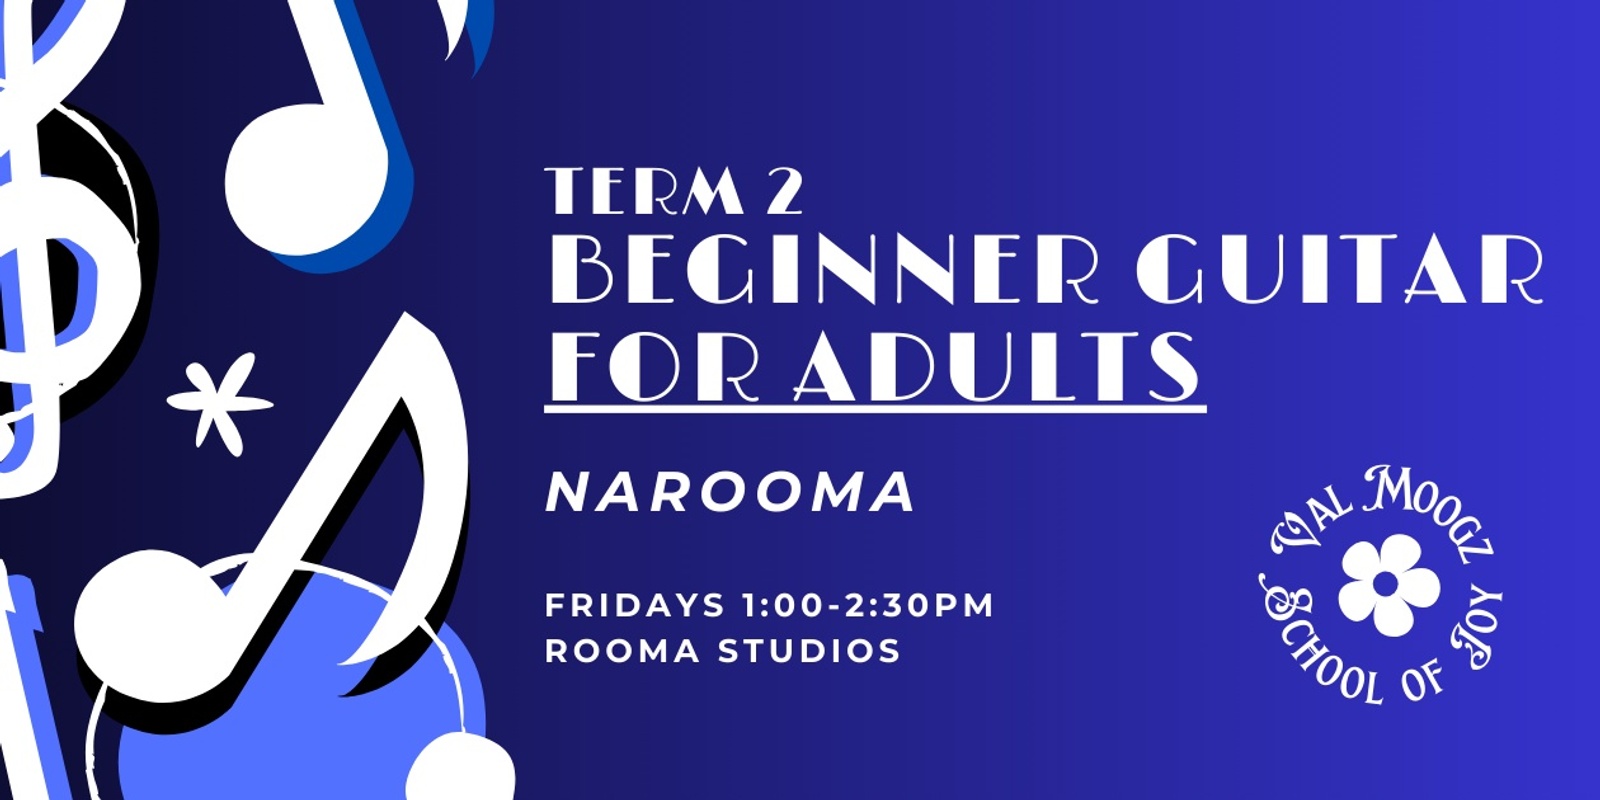 Banner image for Term 2 - Beginner Guitar for Adults - Narooma